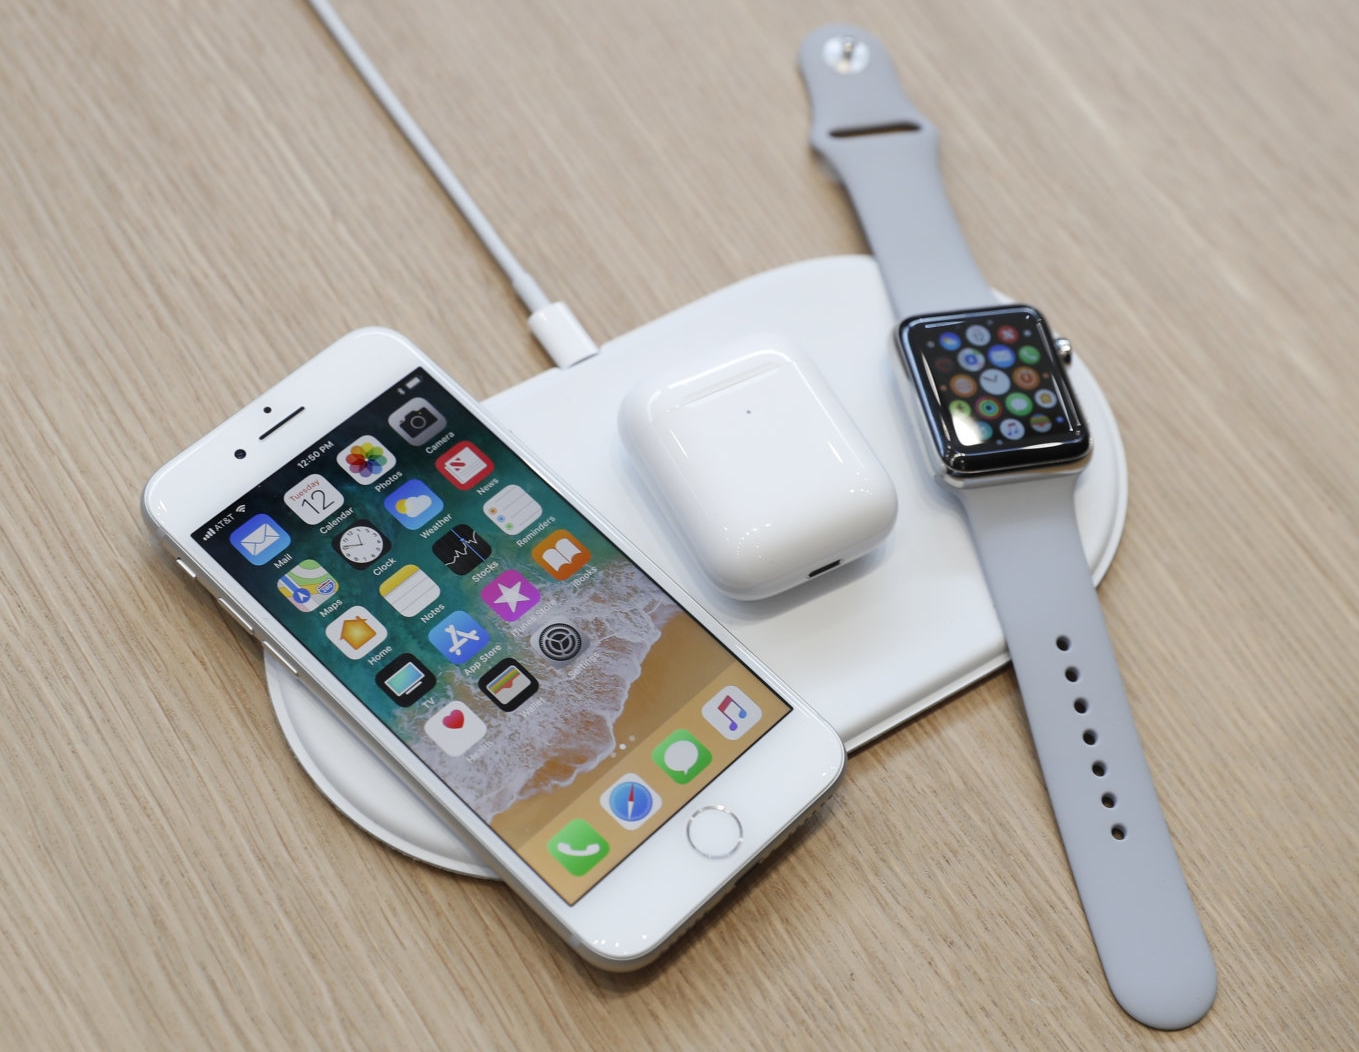 Apple met with technical hurdles in developing AirPower wireless charging mat